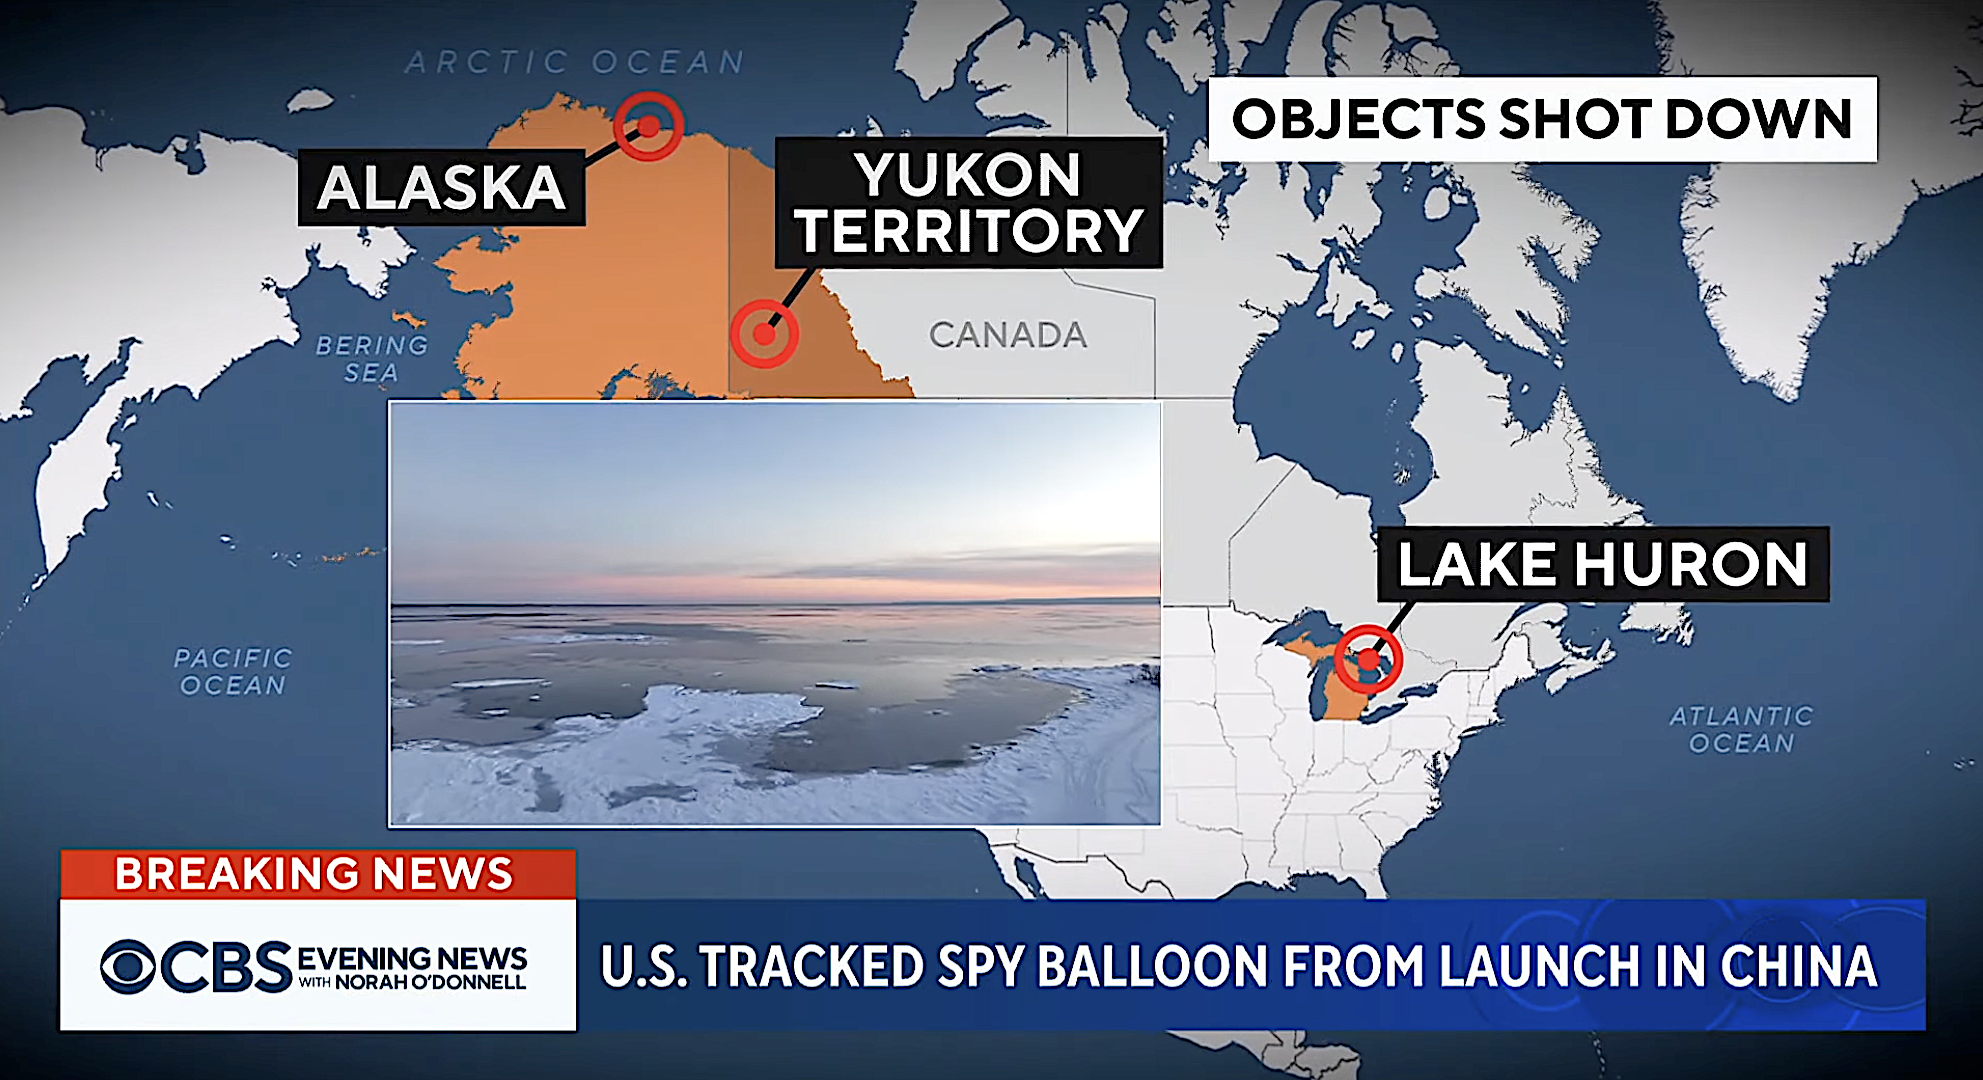 3 objects shot down over U.S., Canada